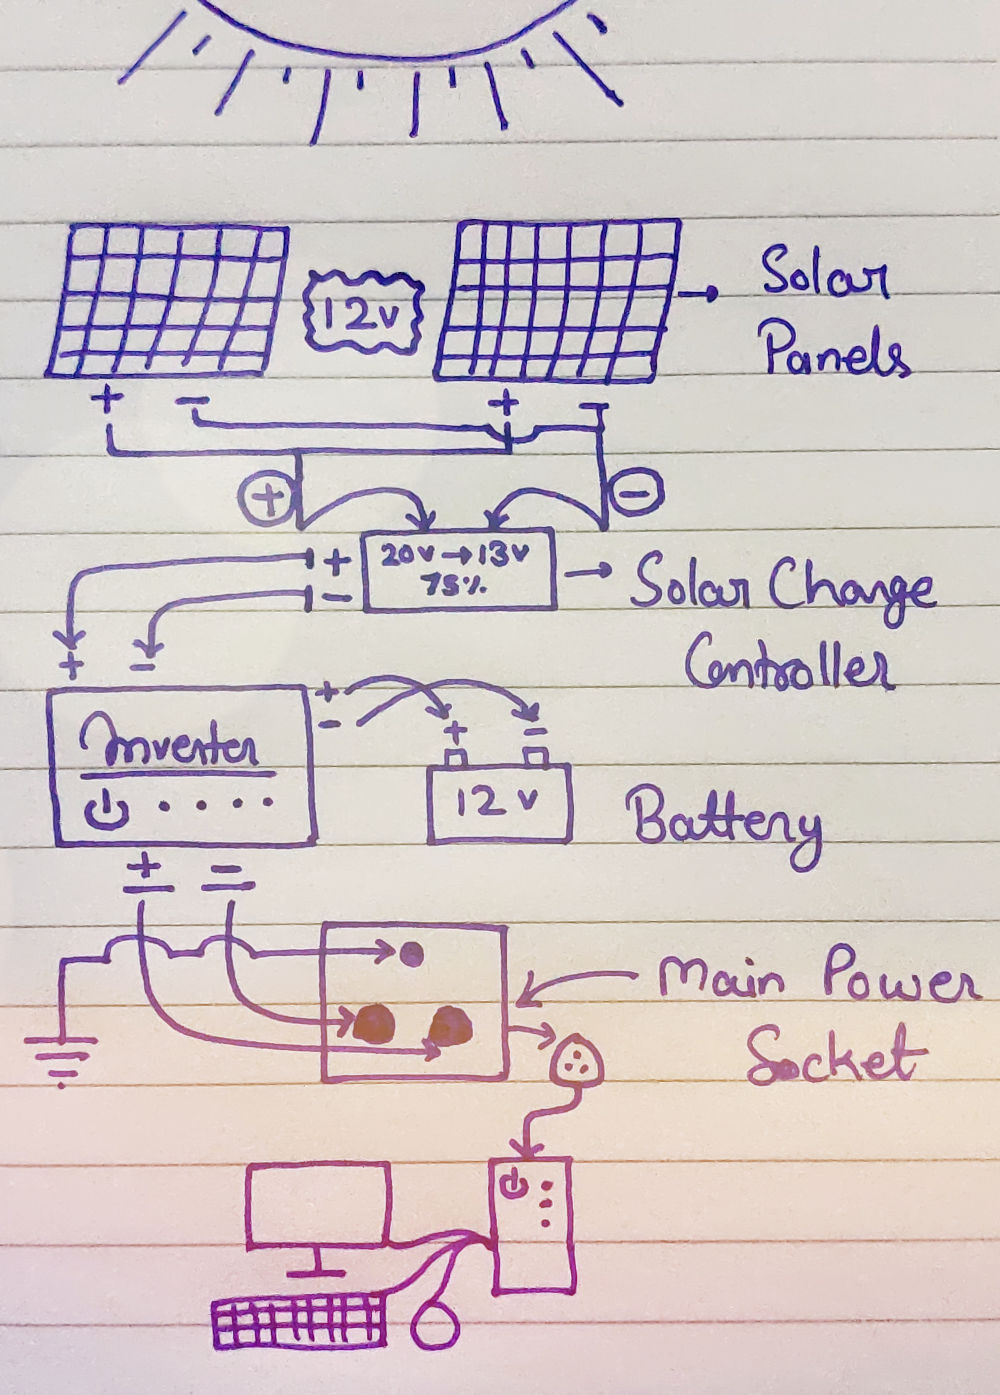 How to Run a Computer on Solar Power